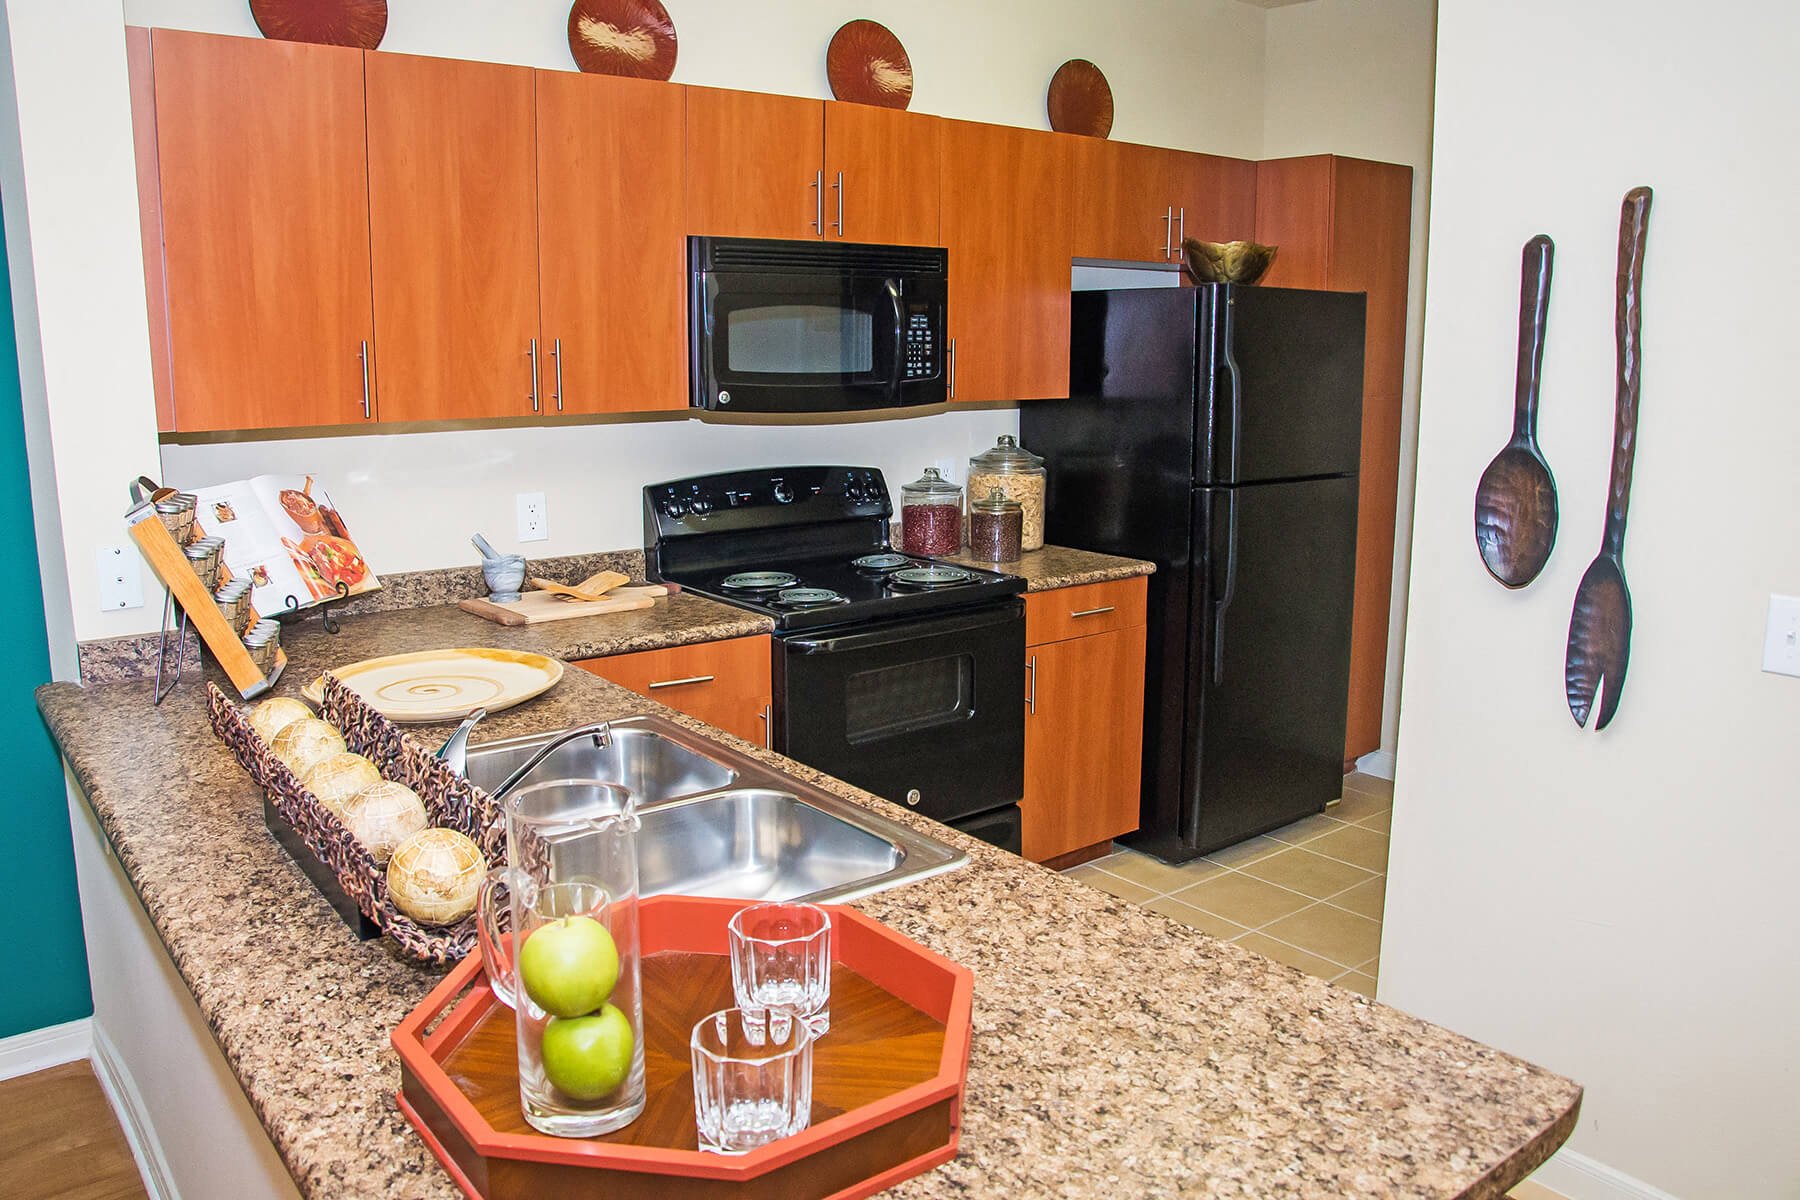 A bright kitchen with a countertop bar at the Lakeland Estates Apartments in Stafford, Texas.